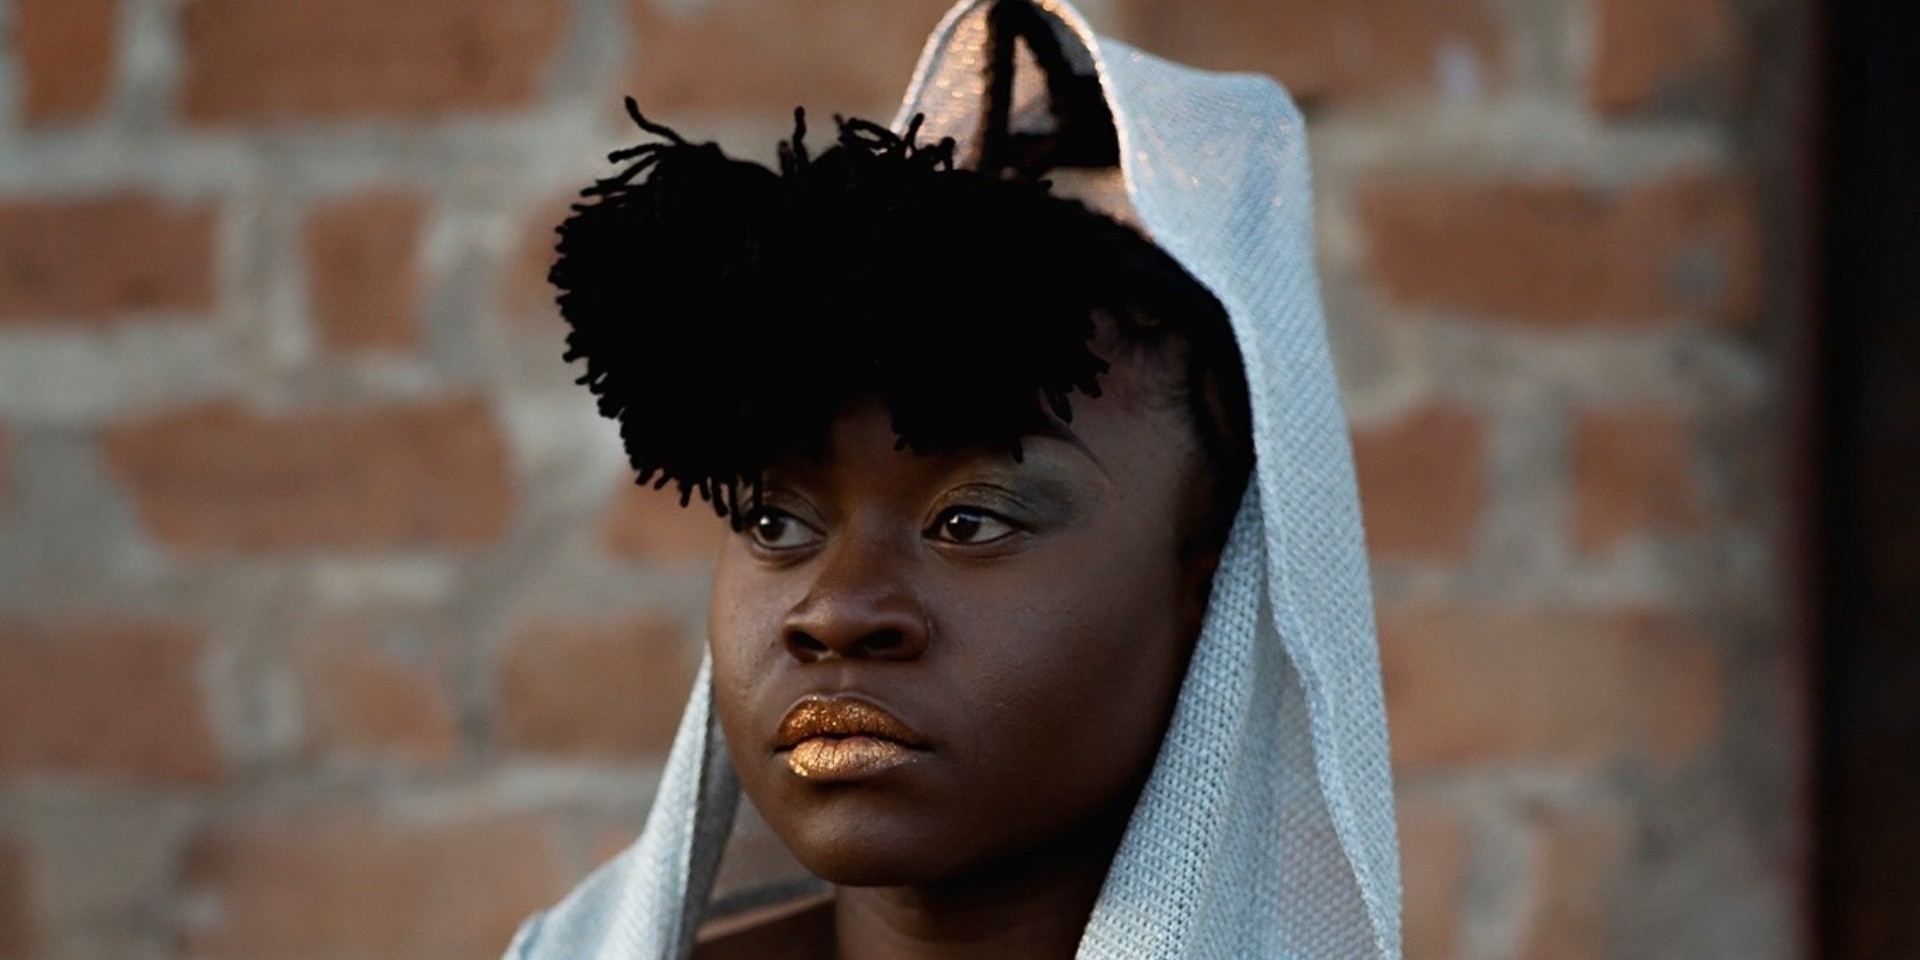 Sampa the Great reveals release date of highly anticipated debut album, The Return